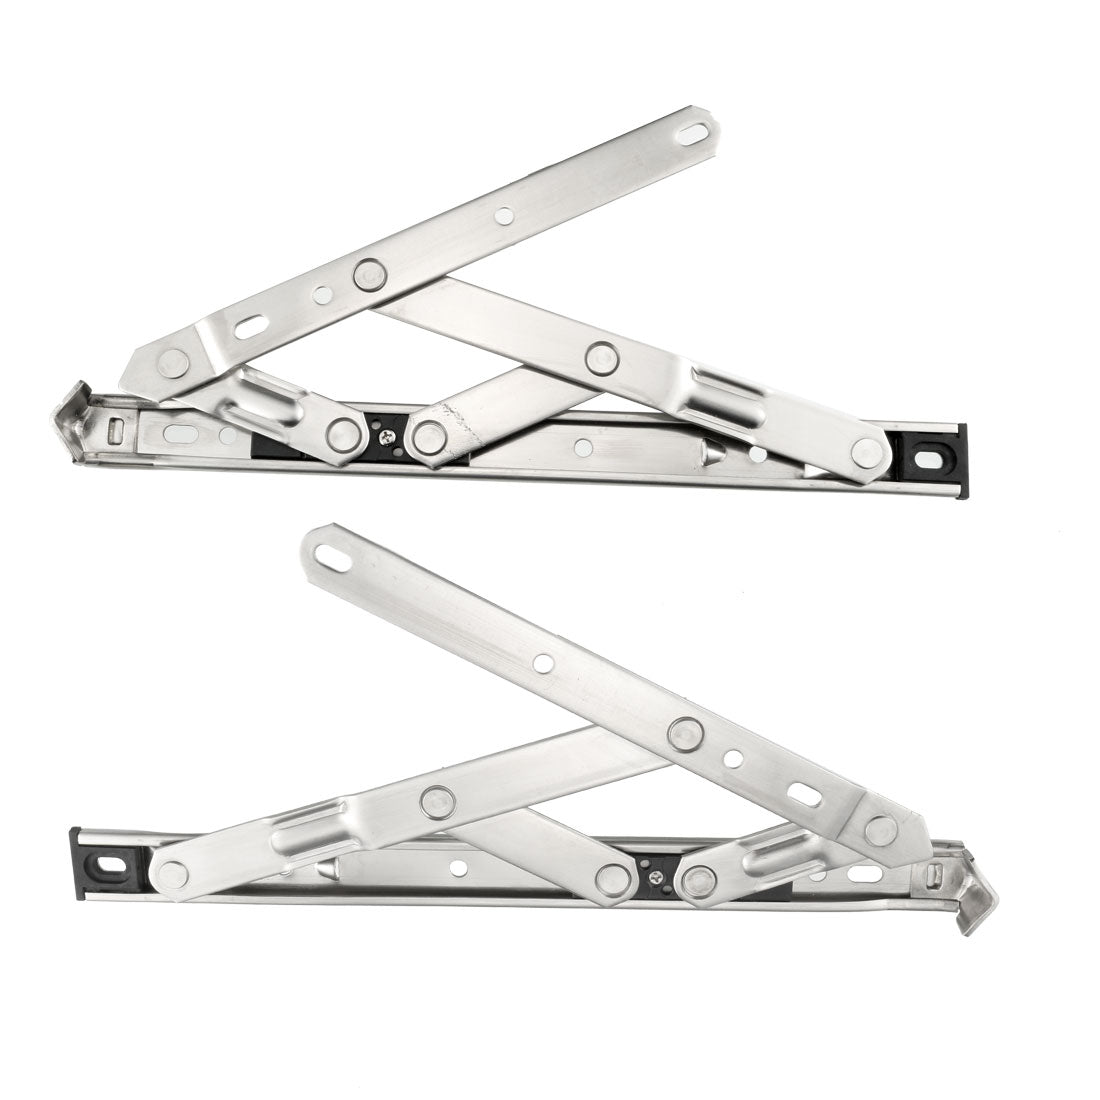 uxcell Uxcell 10-Inch Hanging/Casement Window Hinge, 202 Stainless Steel 2Pcs